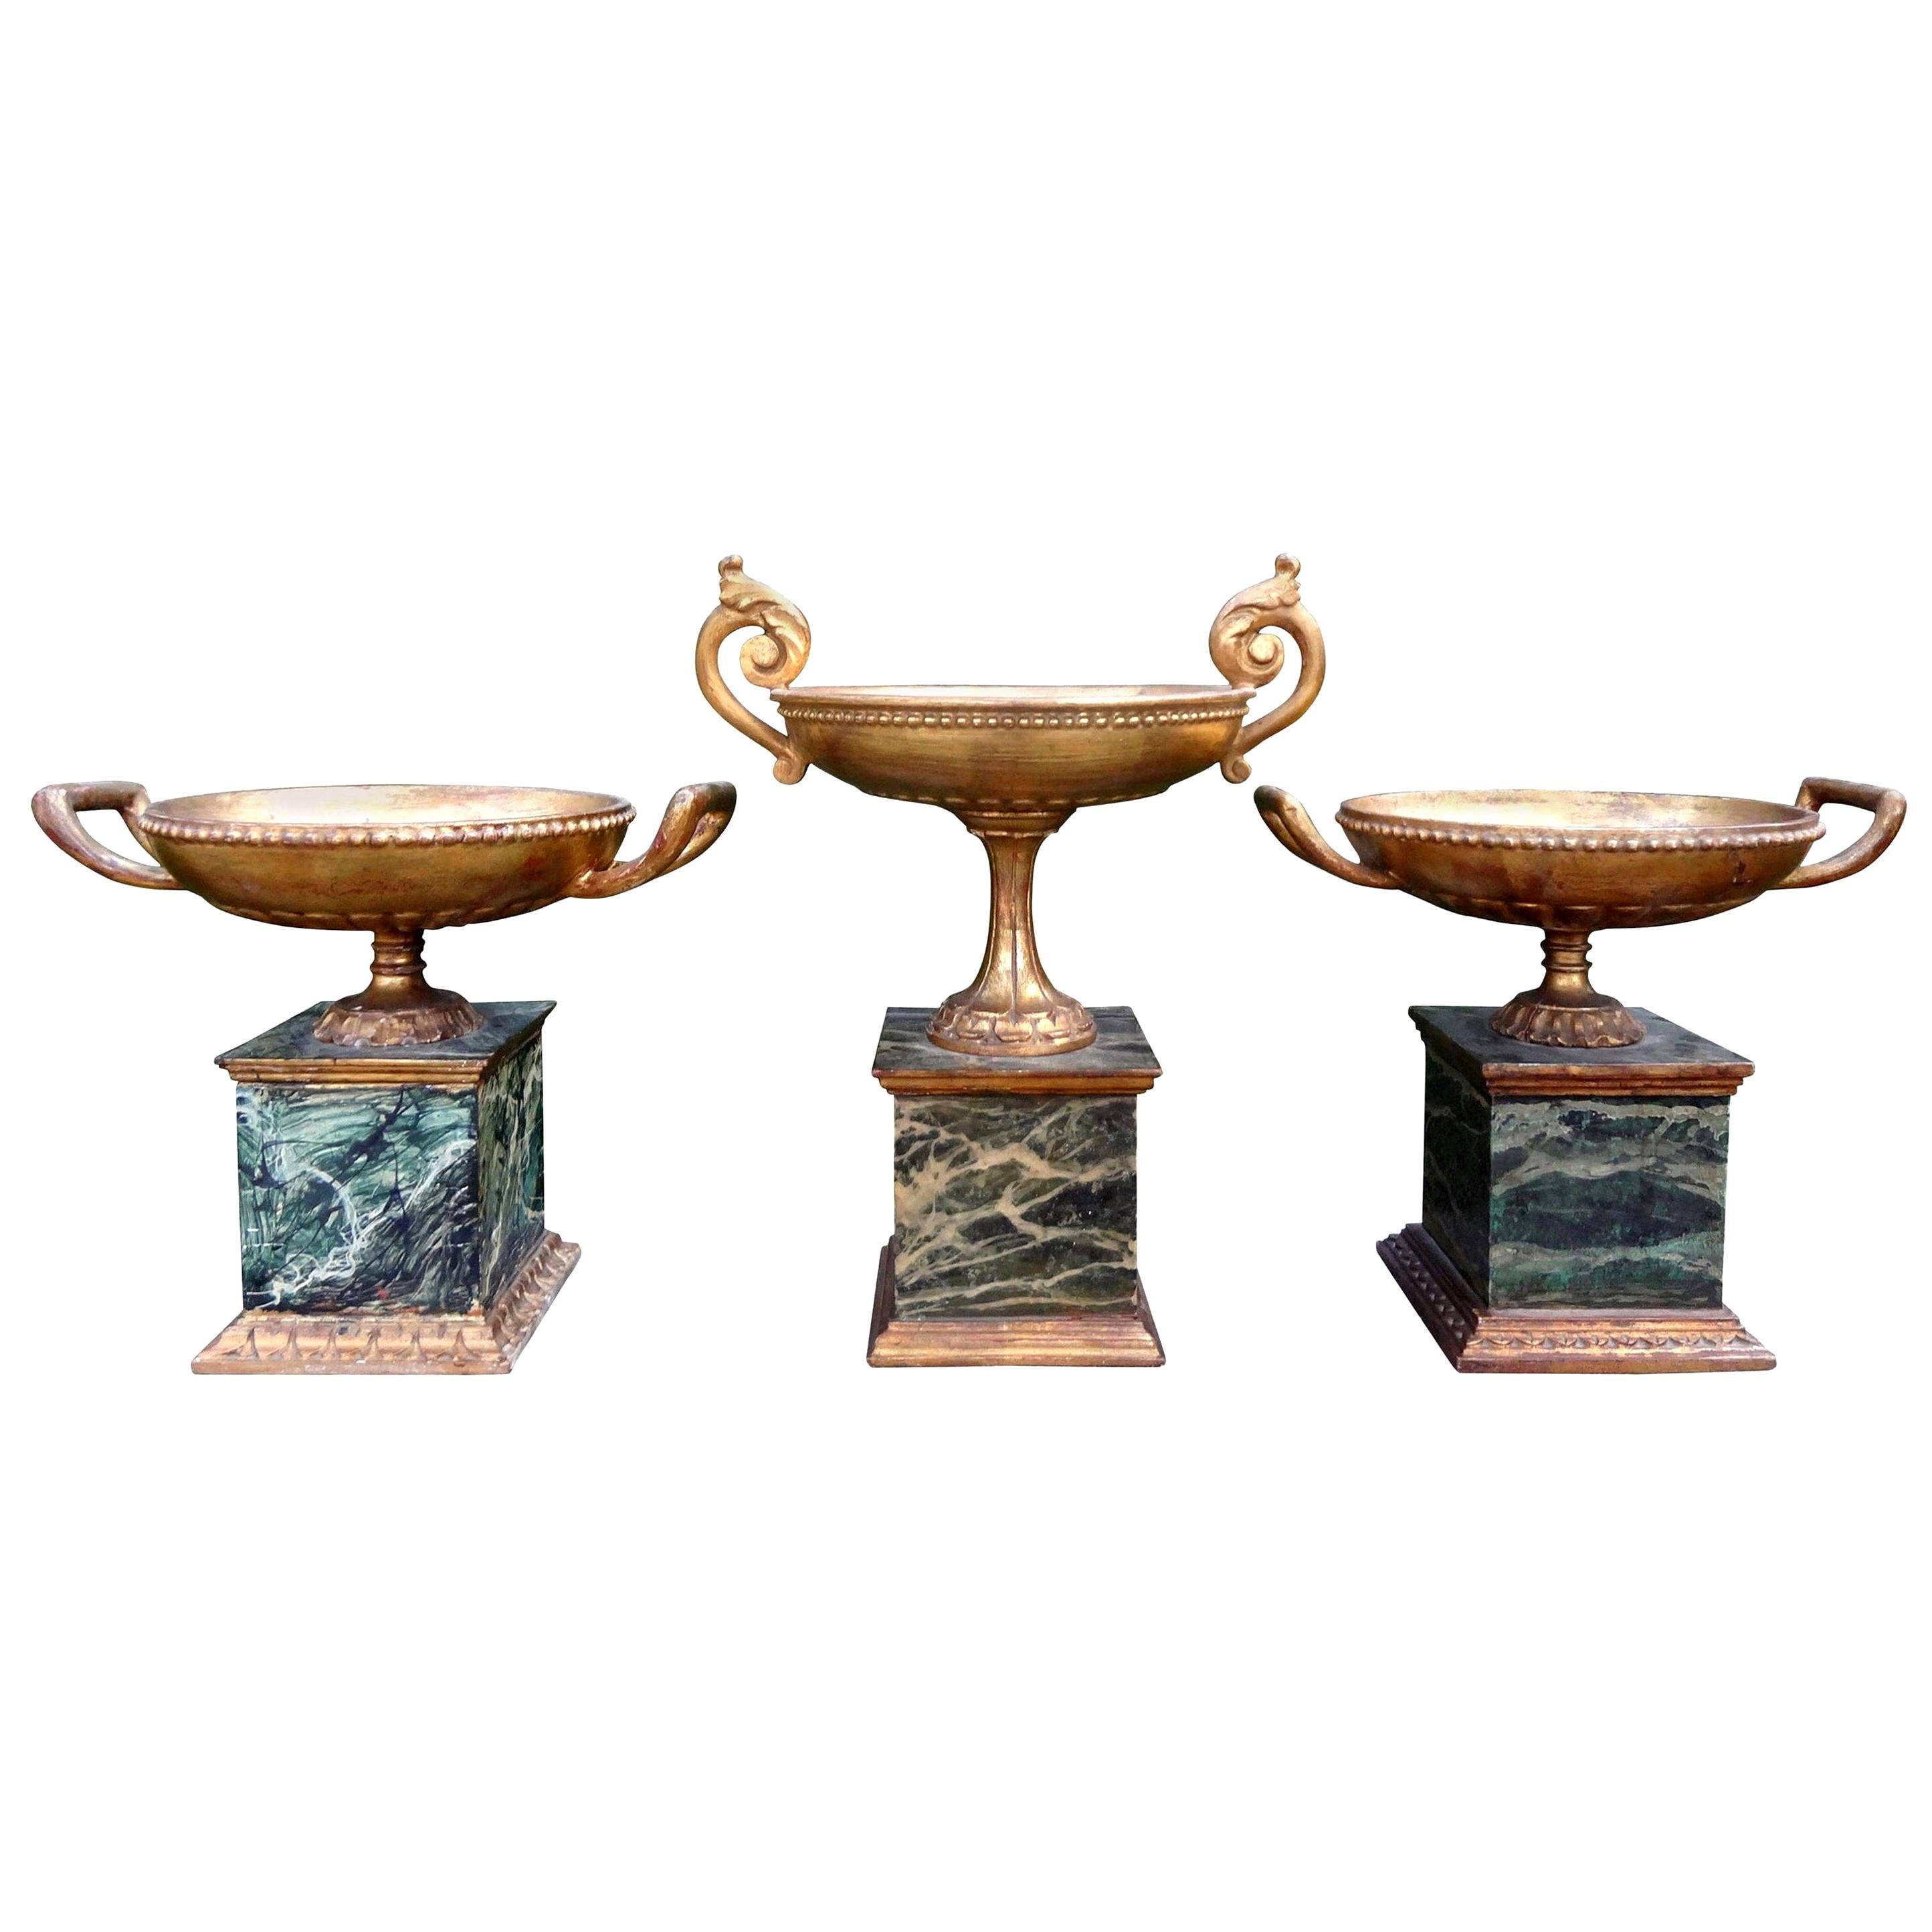 Set of Three Italian Neoclassical Style Carved Giltwood Urns